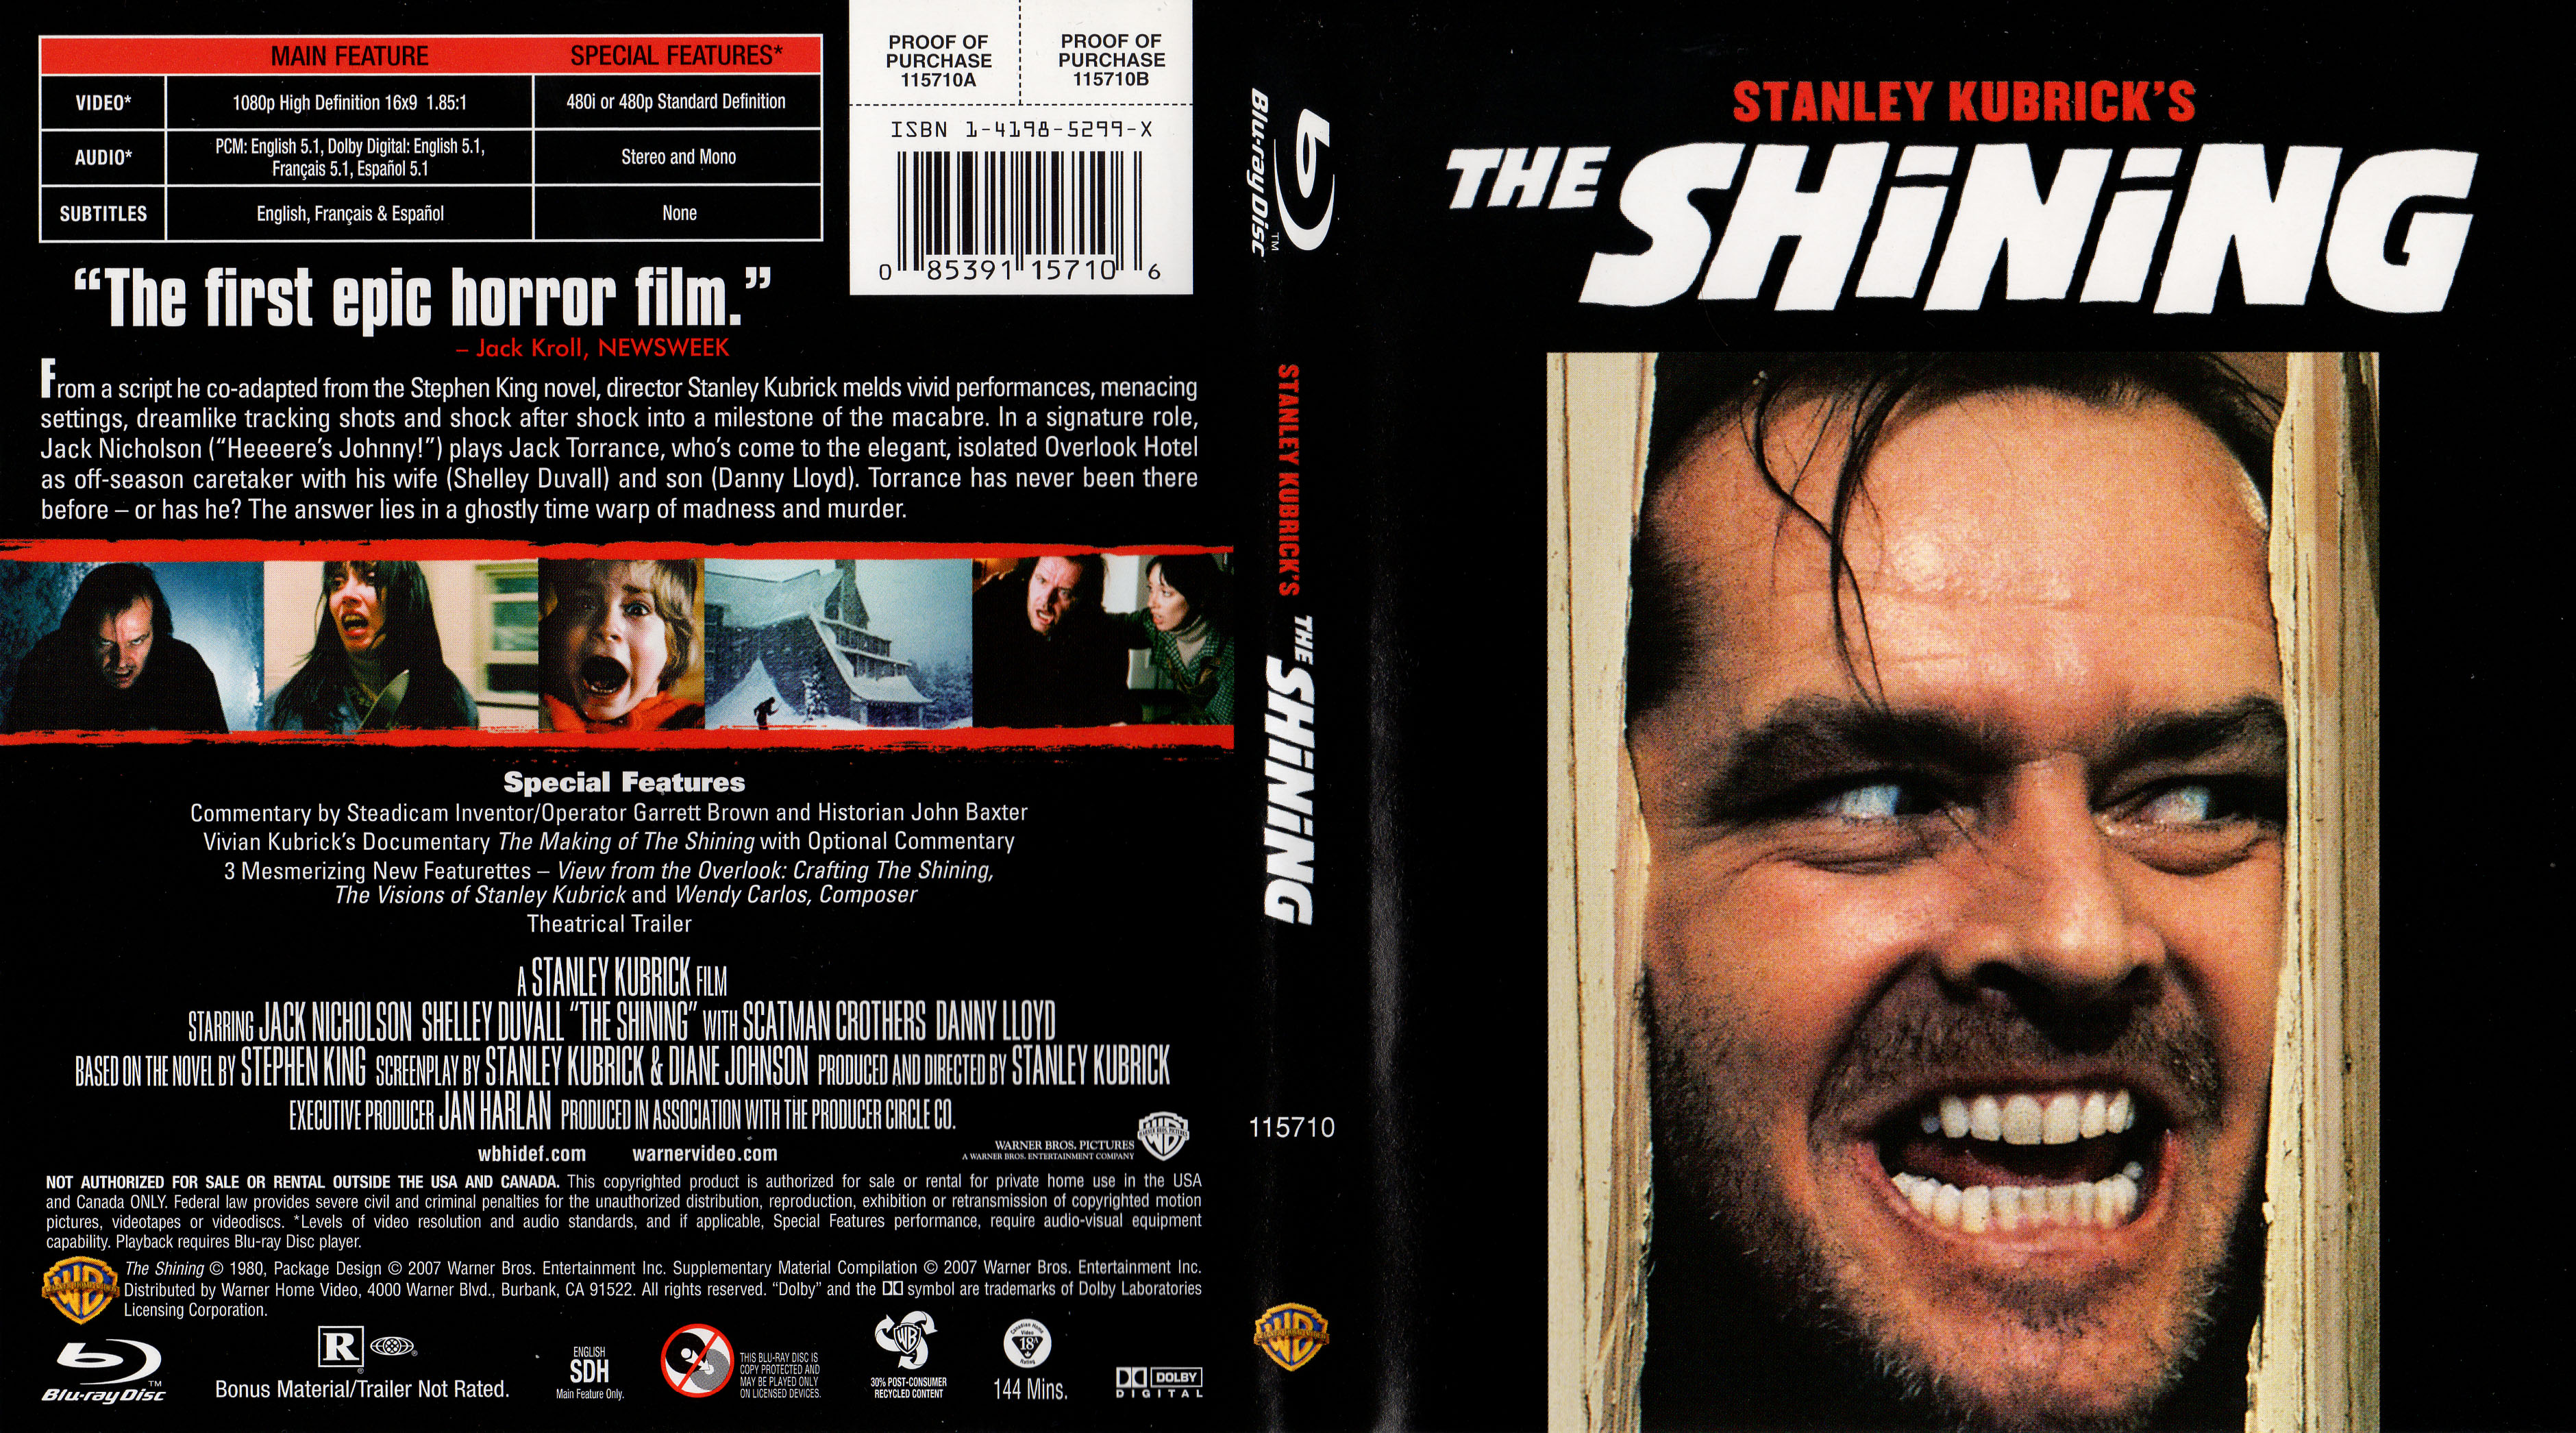 Jaquette DVD The shining Zone 1 (BLU RAY)